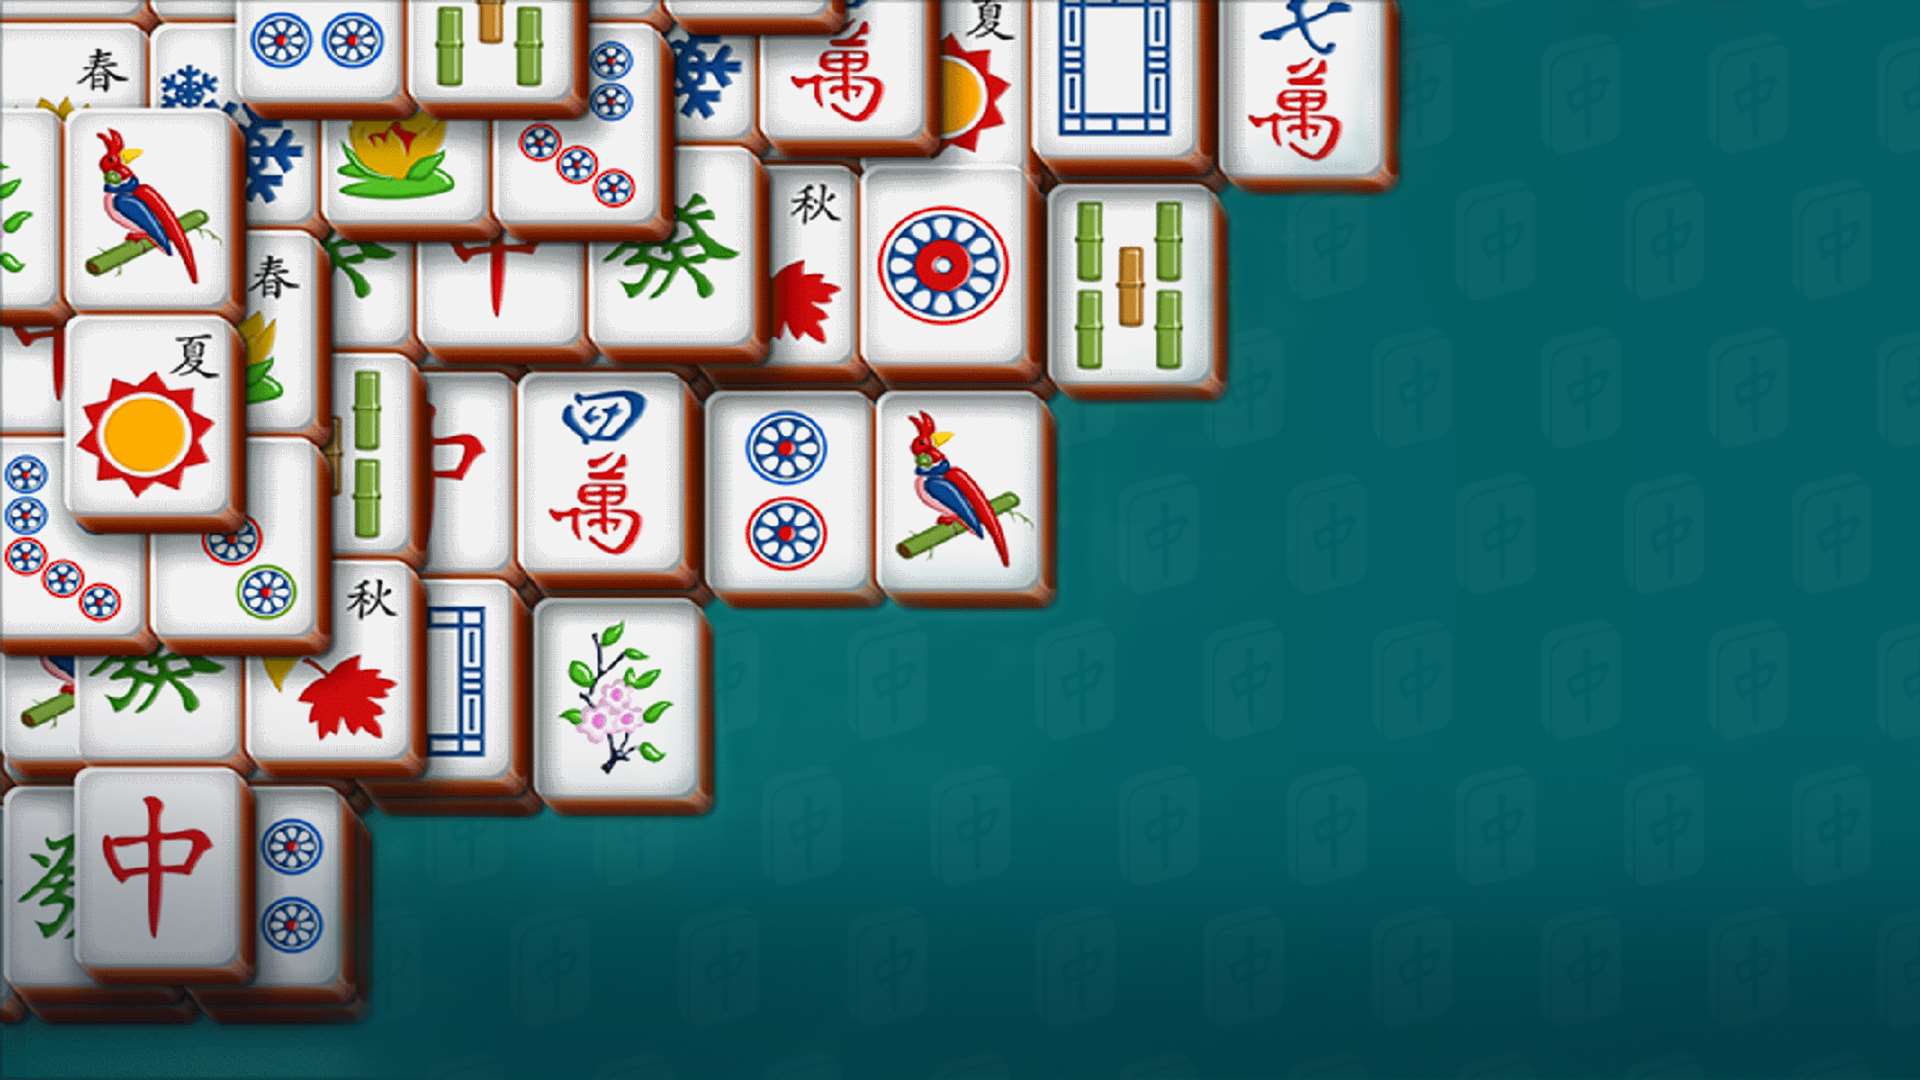 can i download microsoft mahjong to a chromebook